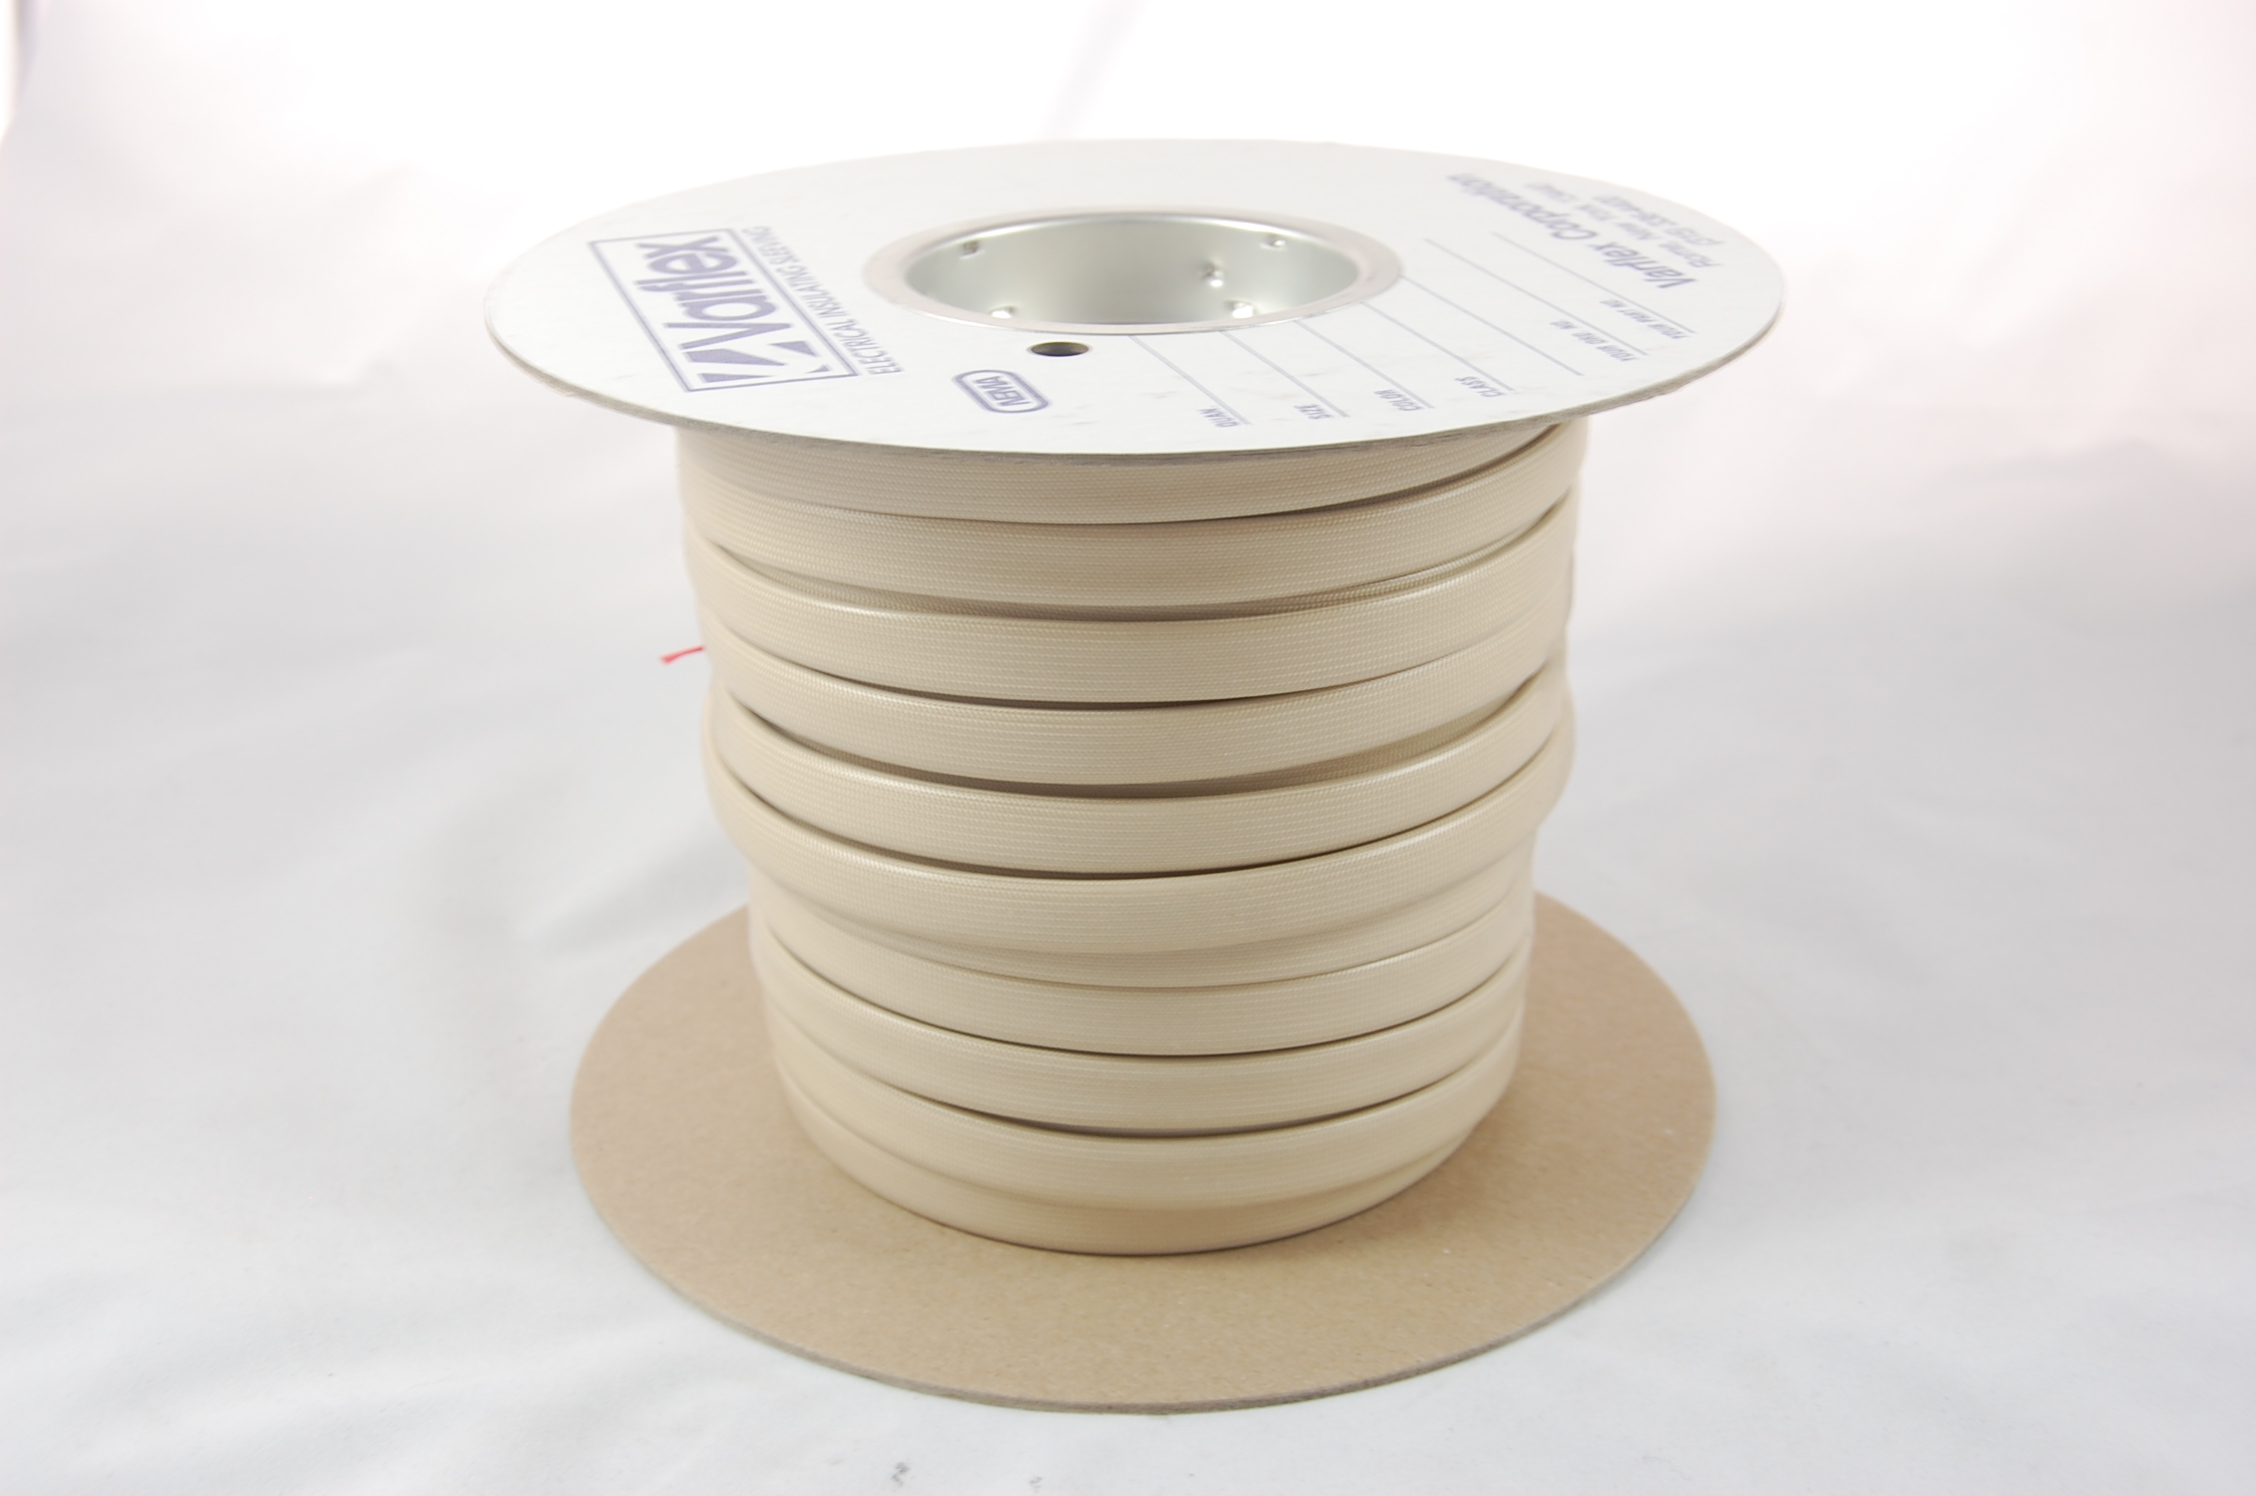 #1 AWG Varglas Silicone Rubber Grade H-A-1 (8000V) High Temperature Silicone Rubber Coated Braided Fiberglass Sleeving 200°C, natural, 150 FT per spool